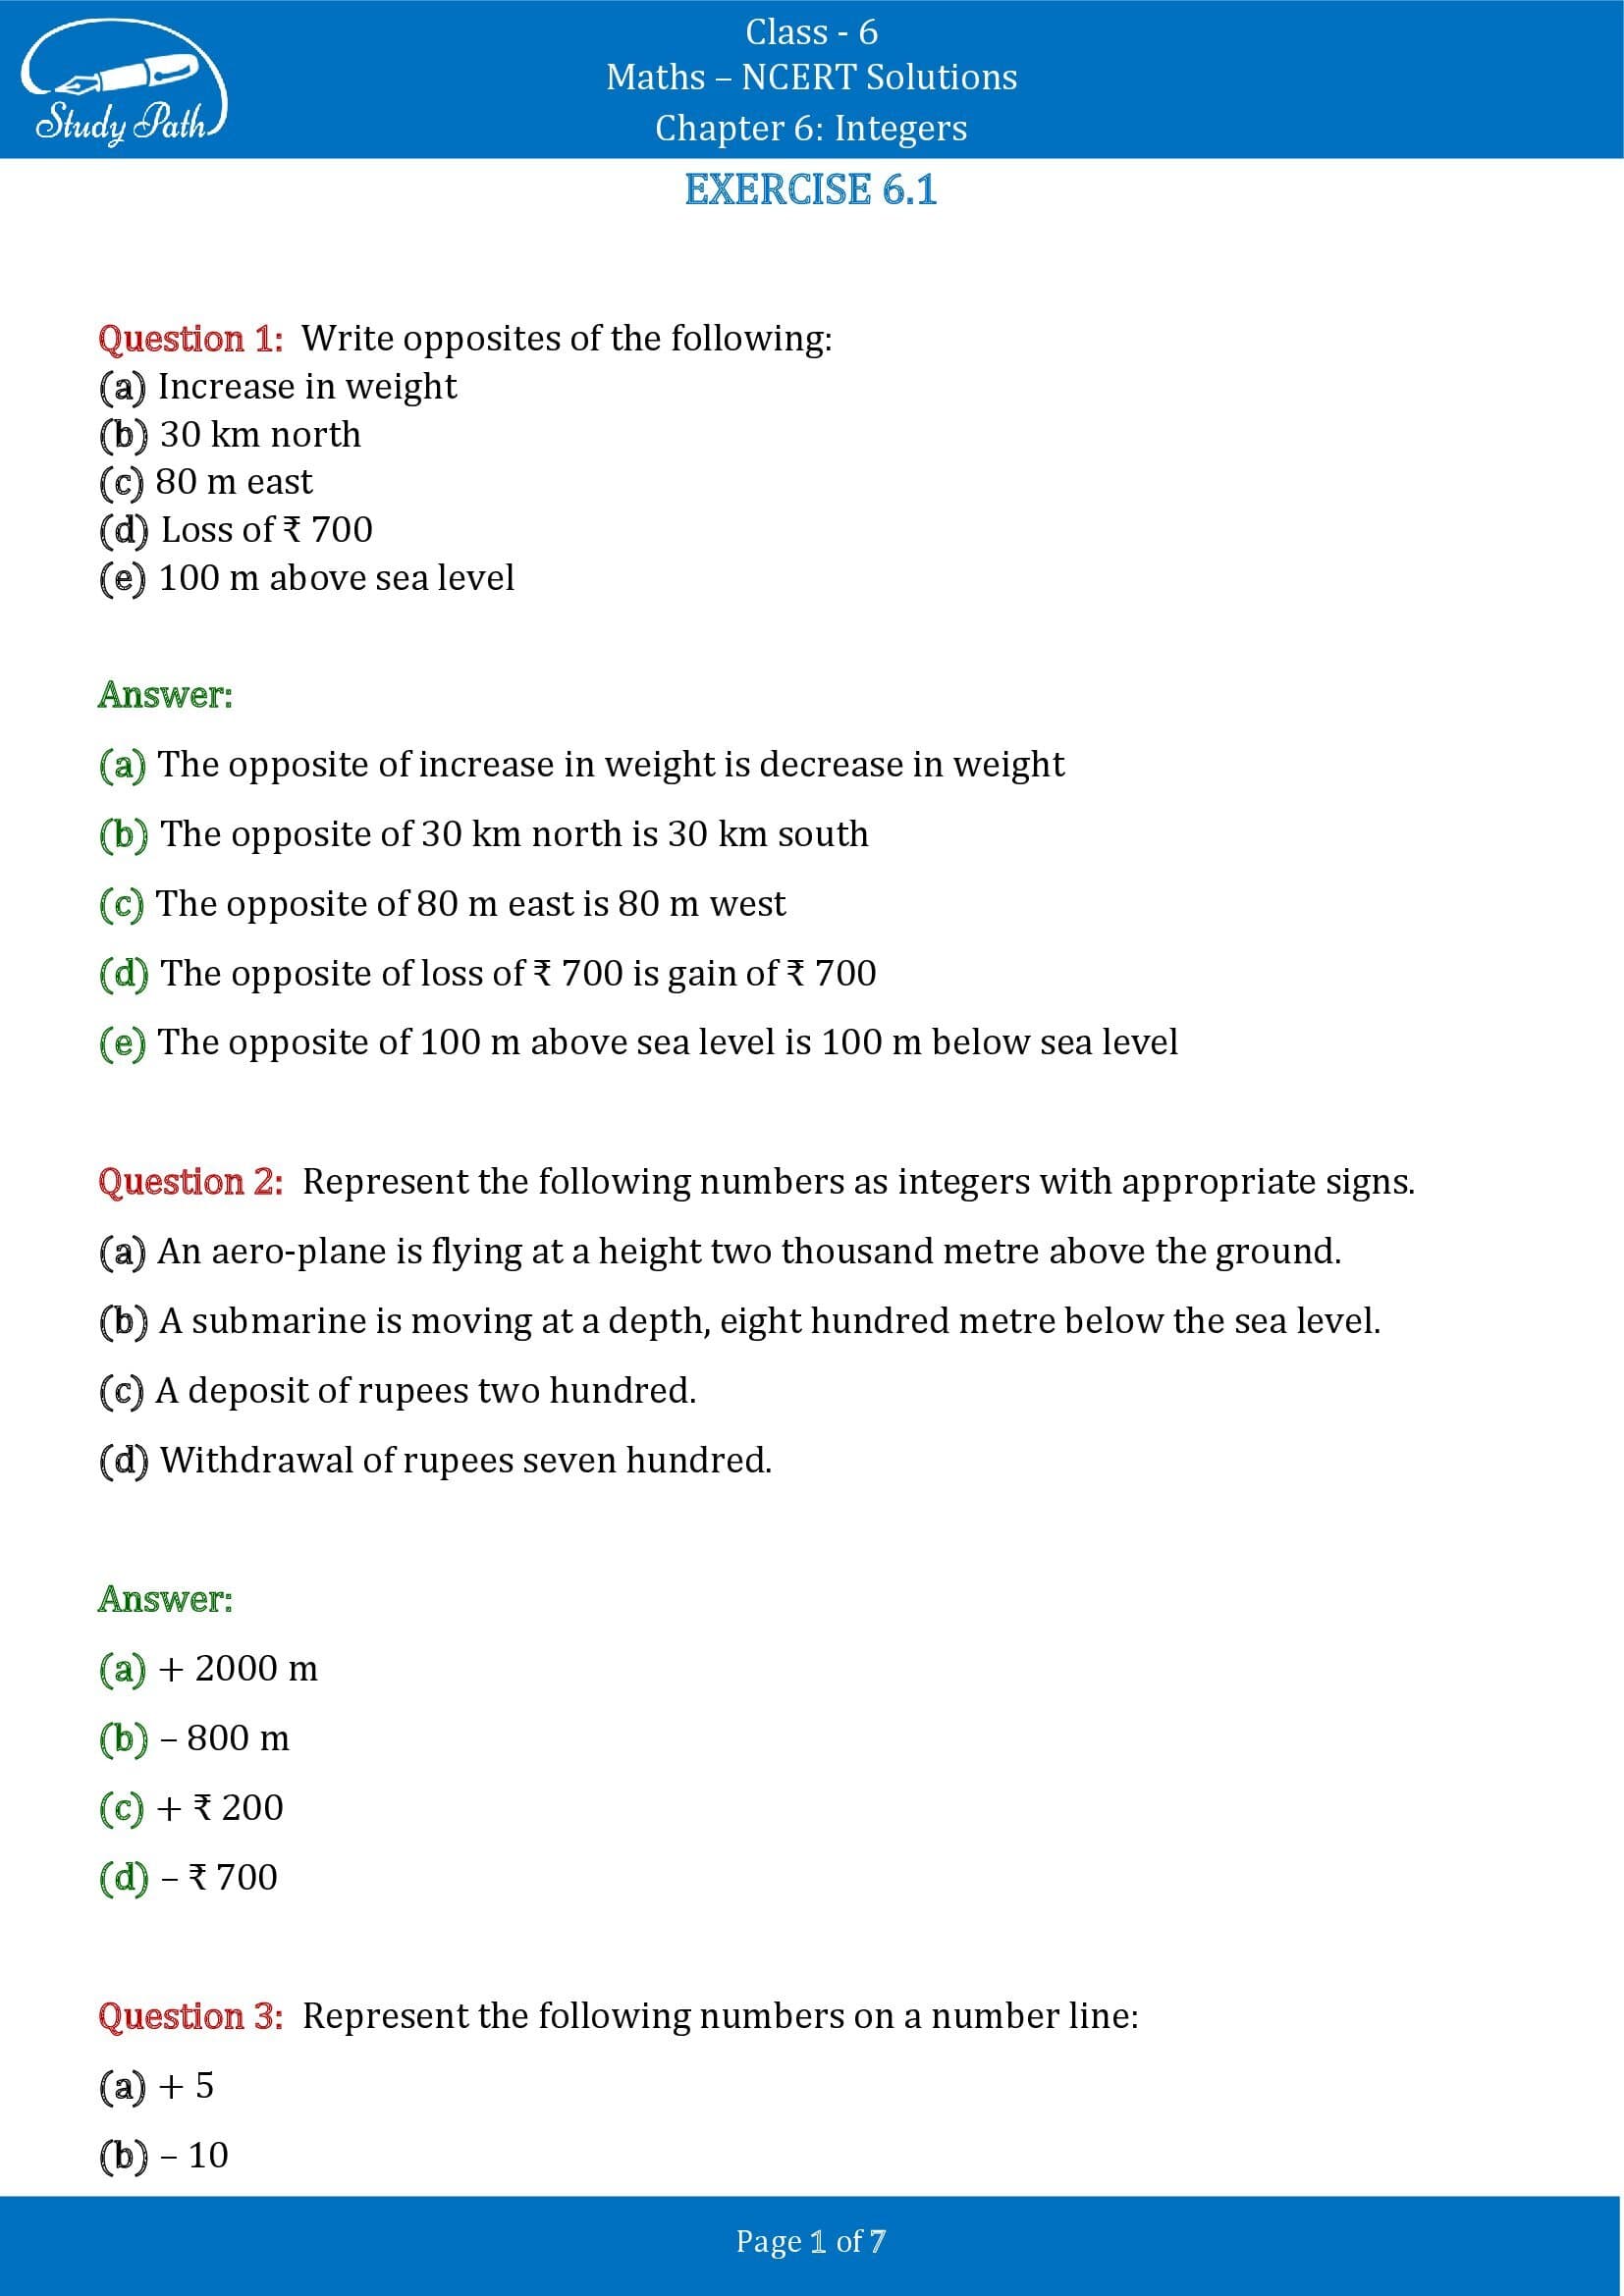 NCERT Solutions for Class 6 Maths Chapter 6 Integers Exercise 6.1 00001